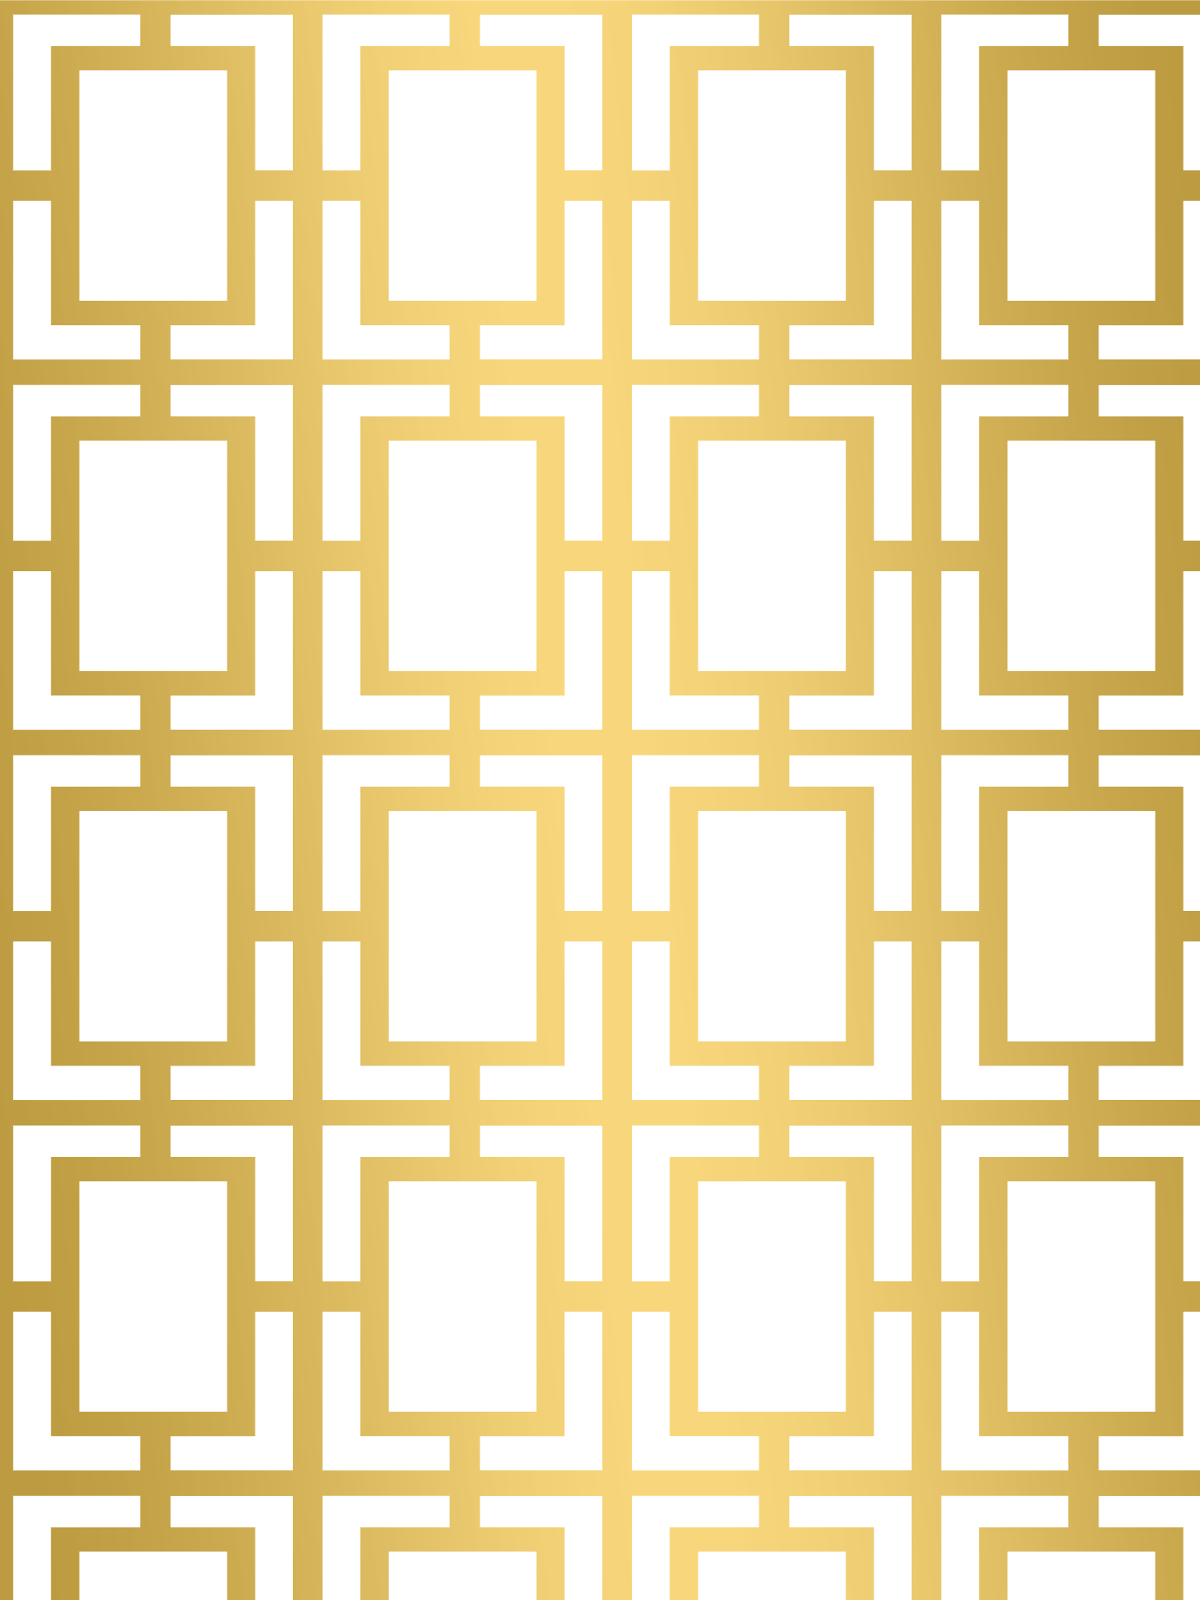 Black And Gold Geometric Wallpapers